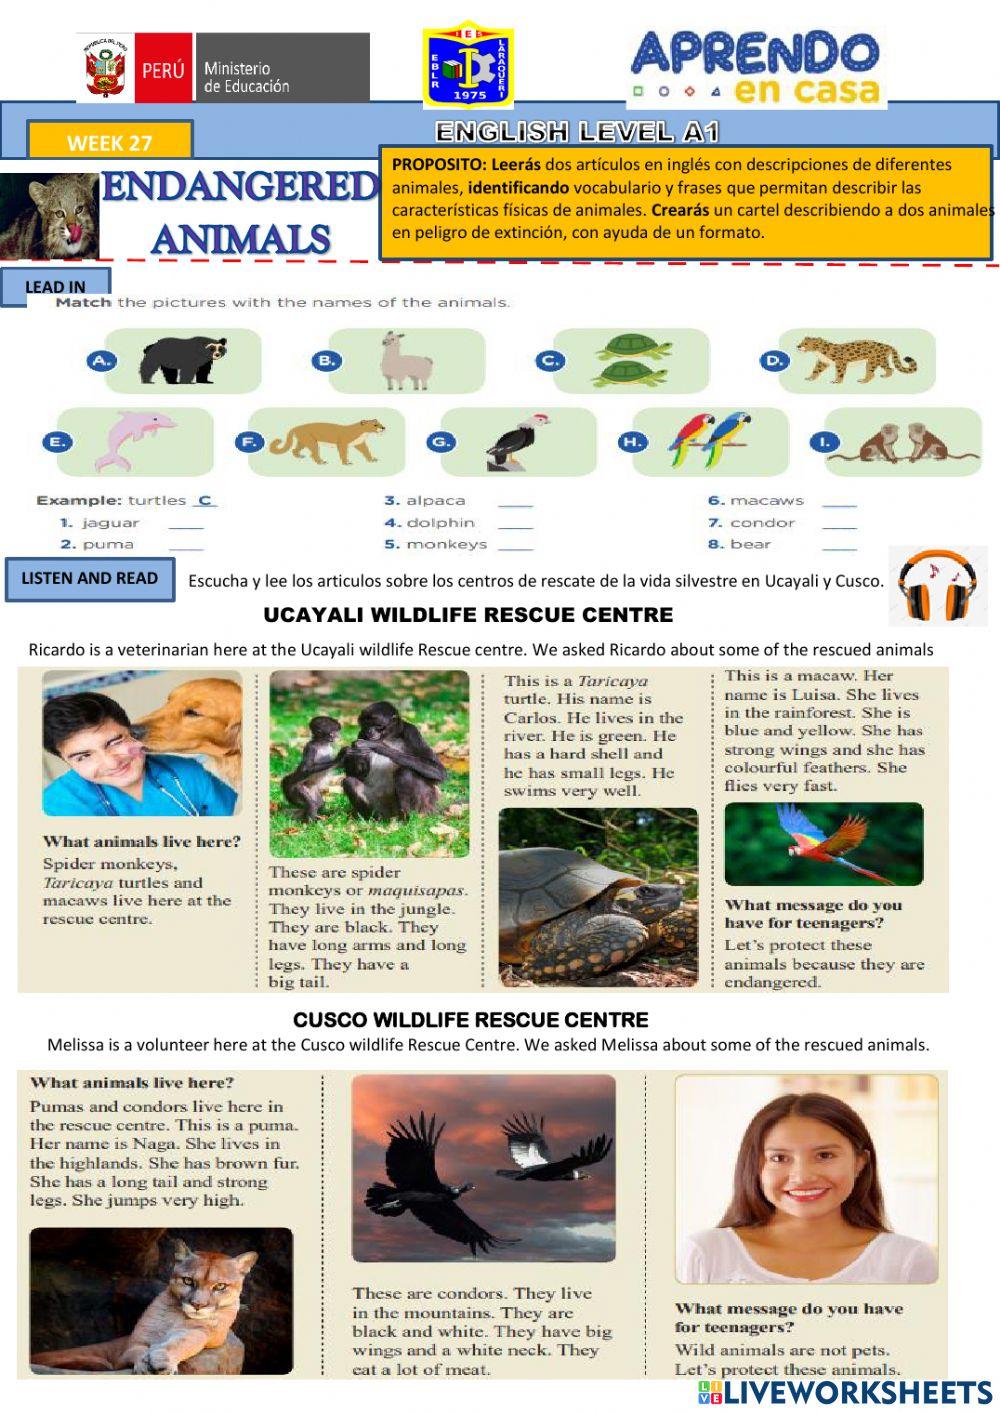 Endegered animals